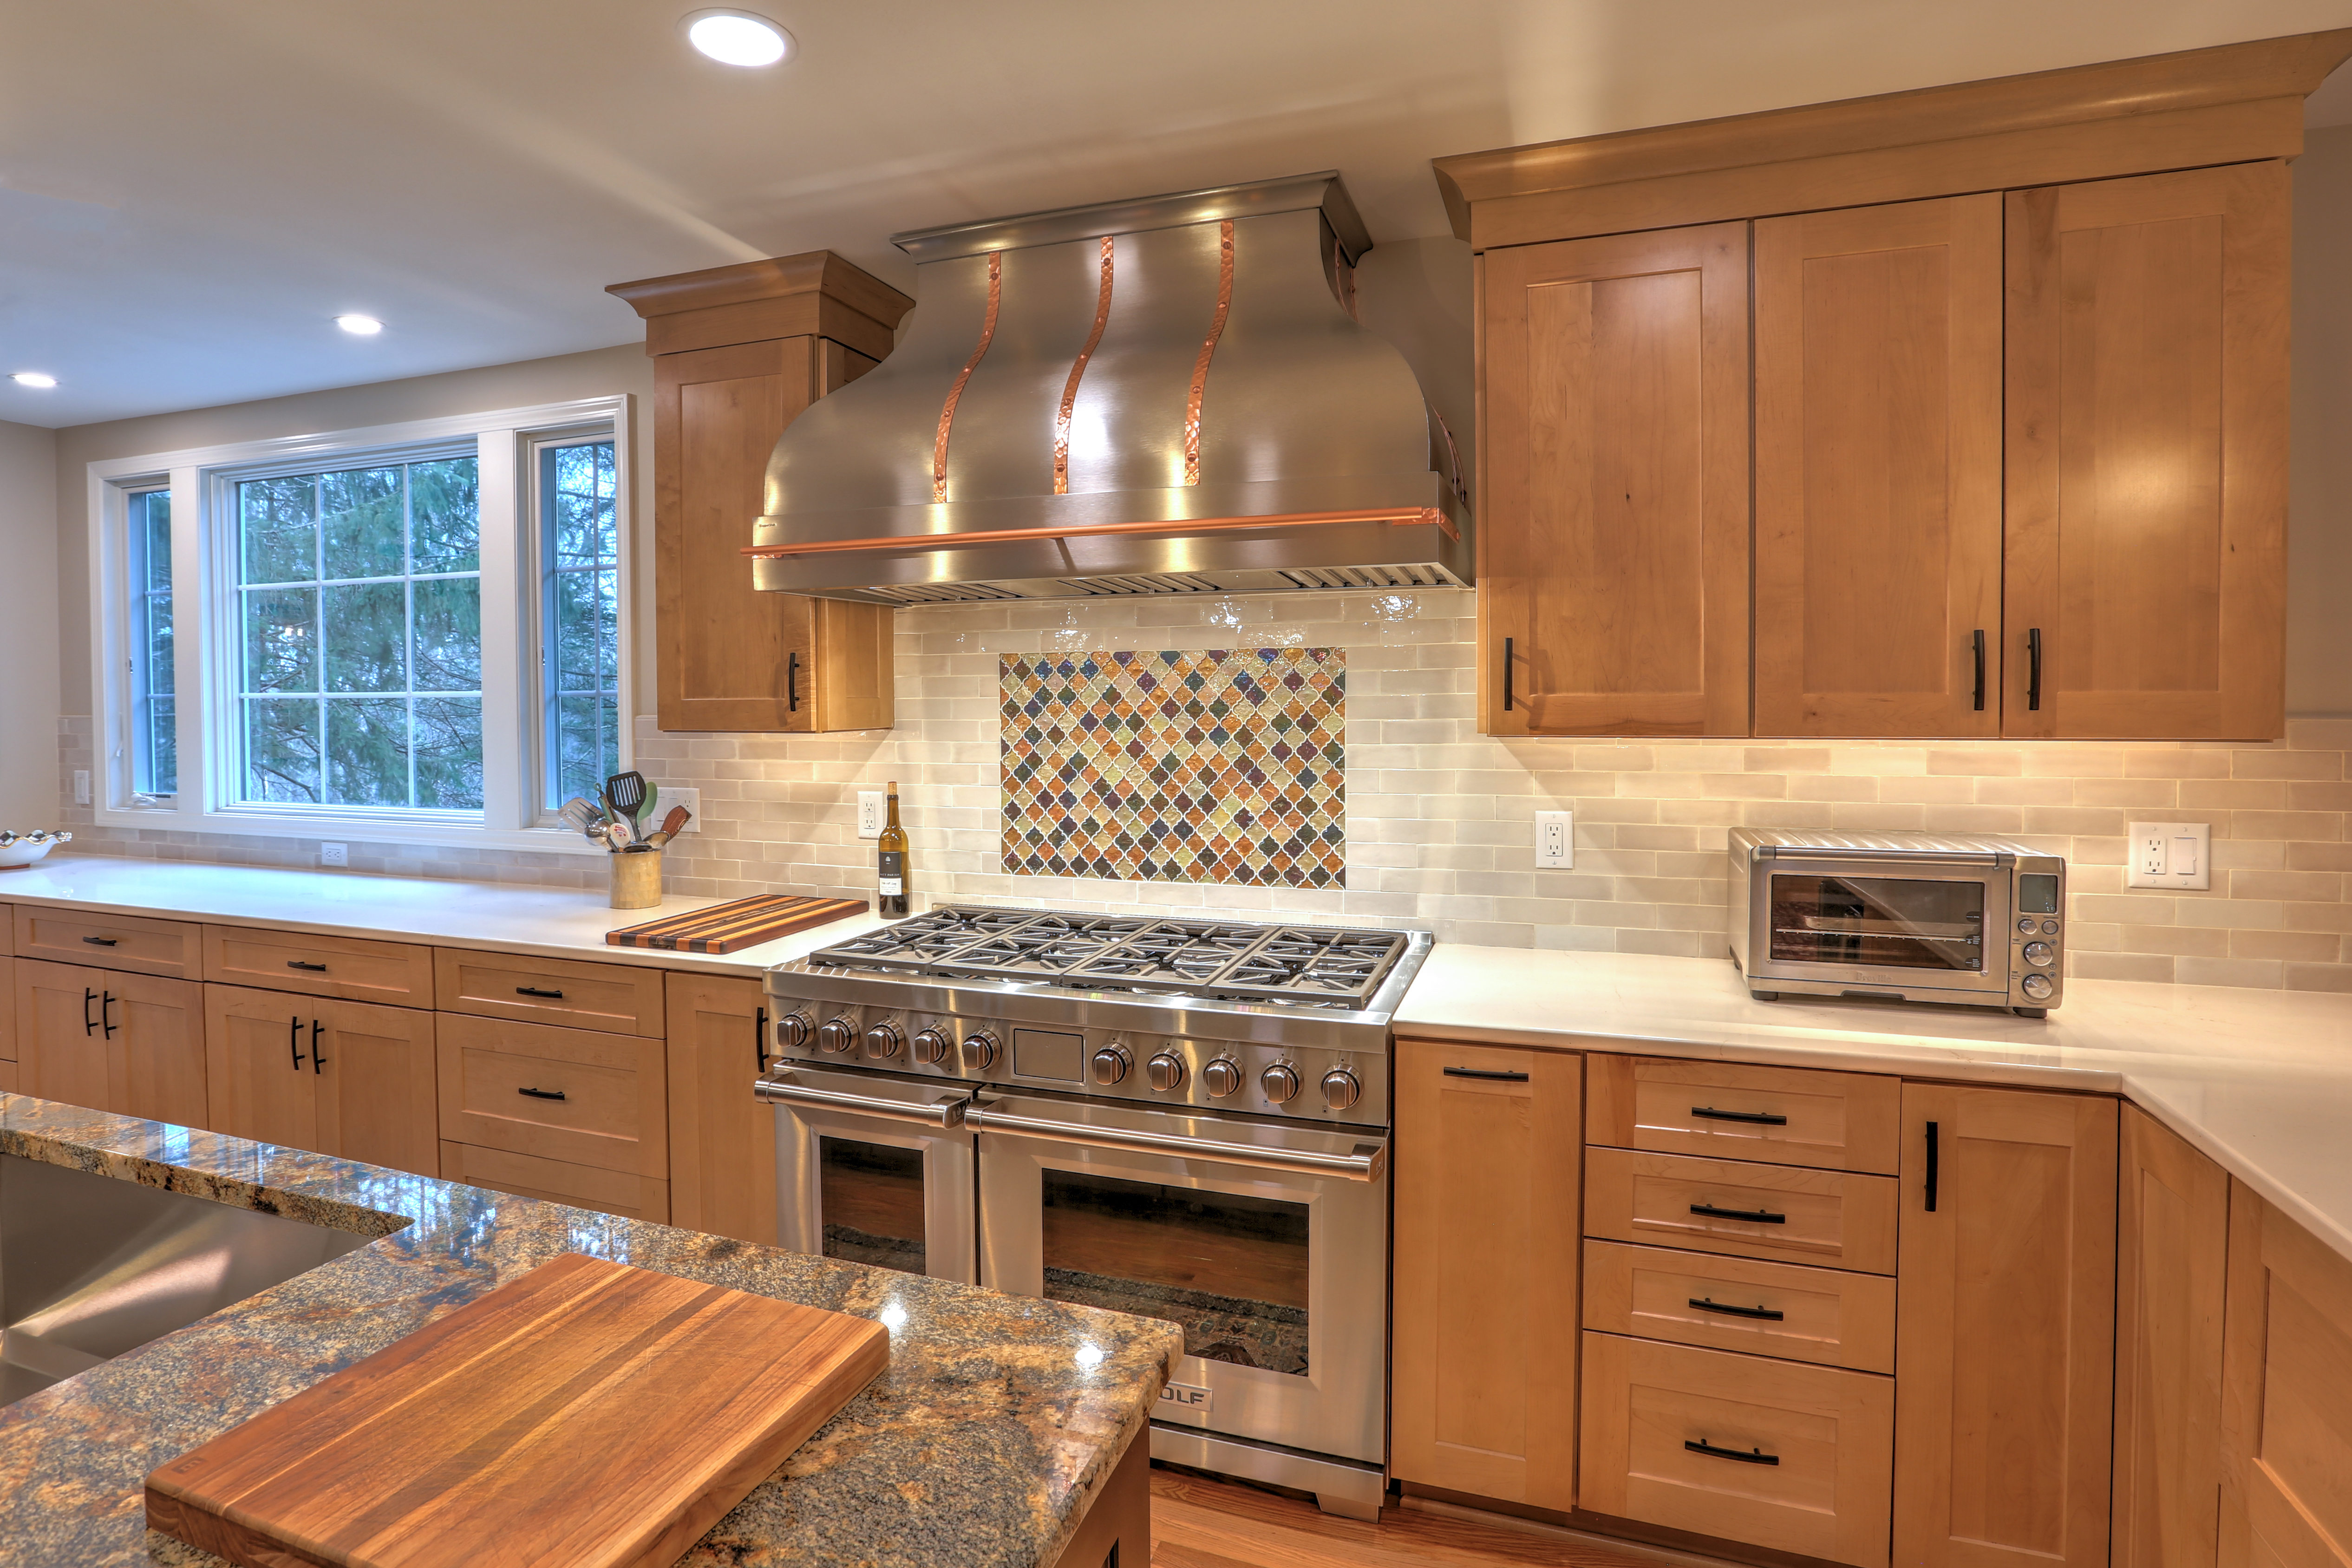 CopperSmith Artisan AT3 Wall Mount Stainless Steel Range Hood with Straps and Pot Rail in a rustic kitchen with white tile backsplash, white countertops and wood cabinets